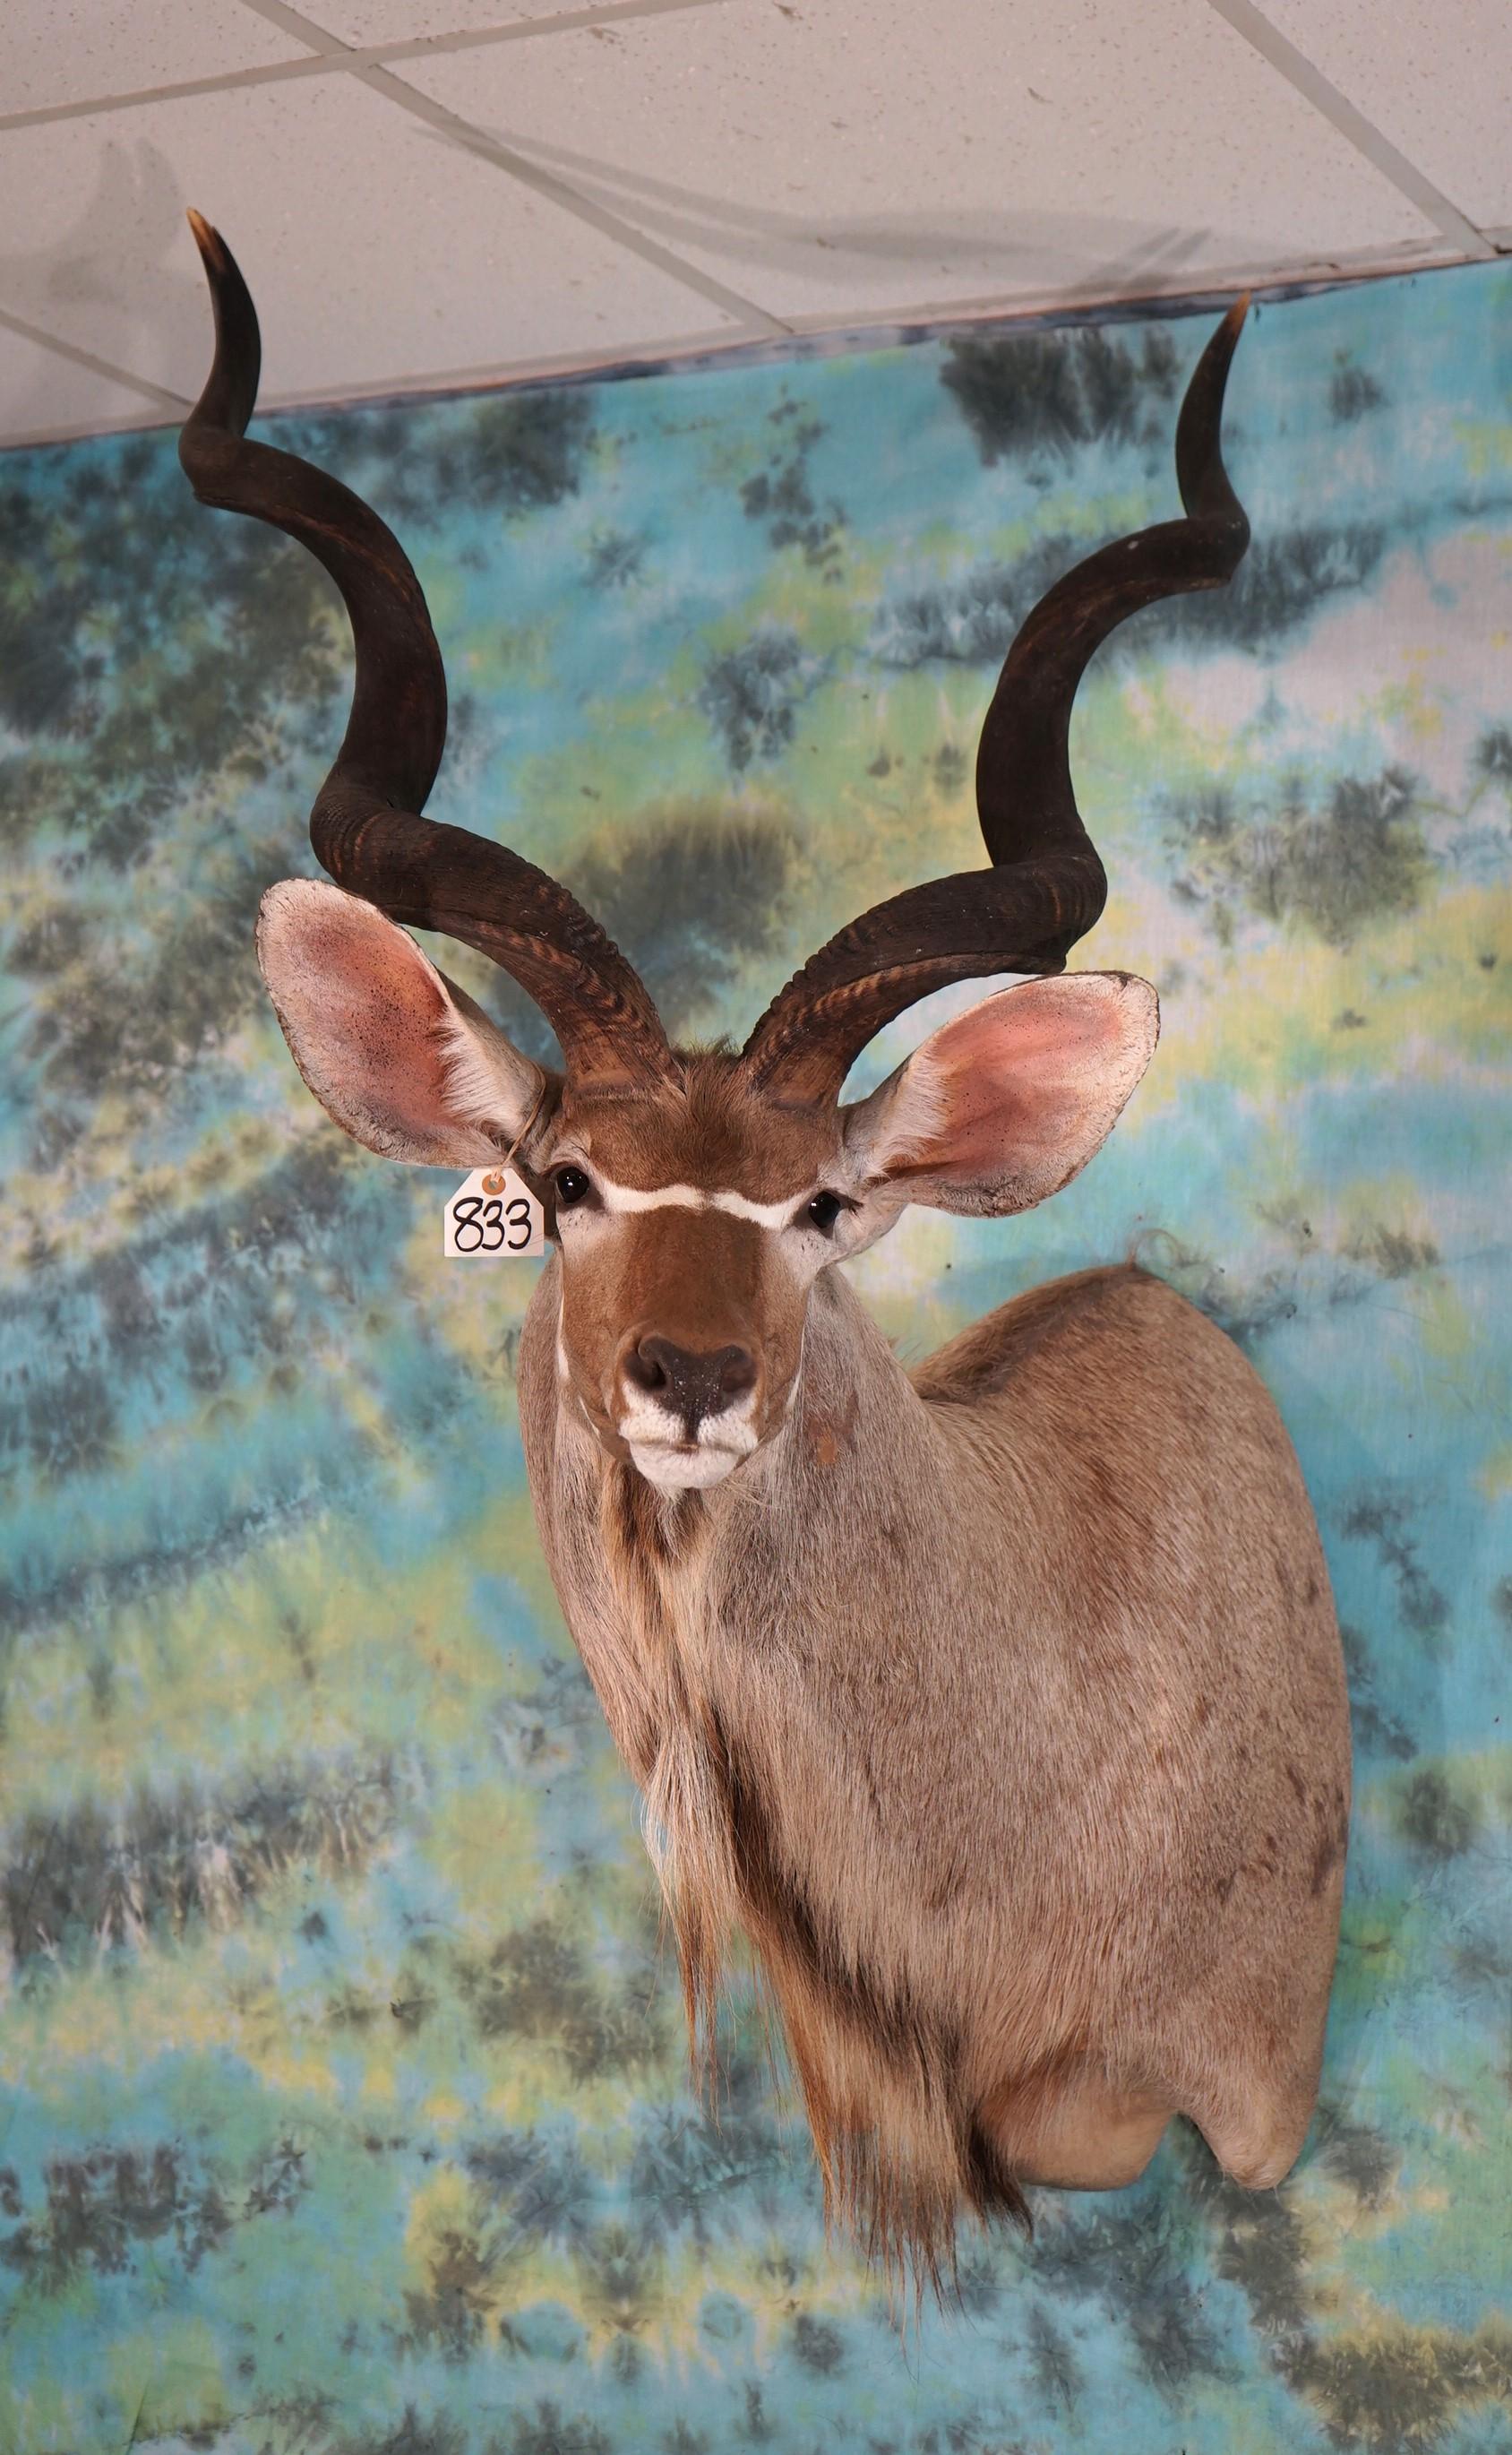 African Greater Kudu Shoulder Taxidermy Mount